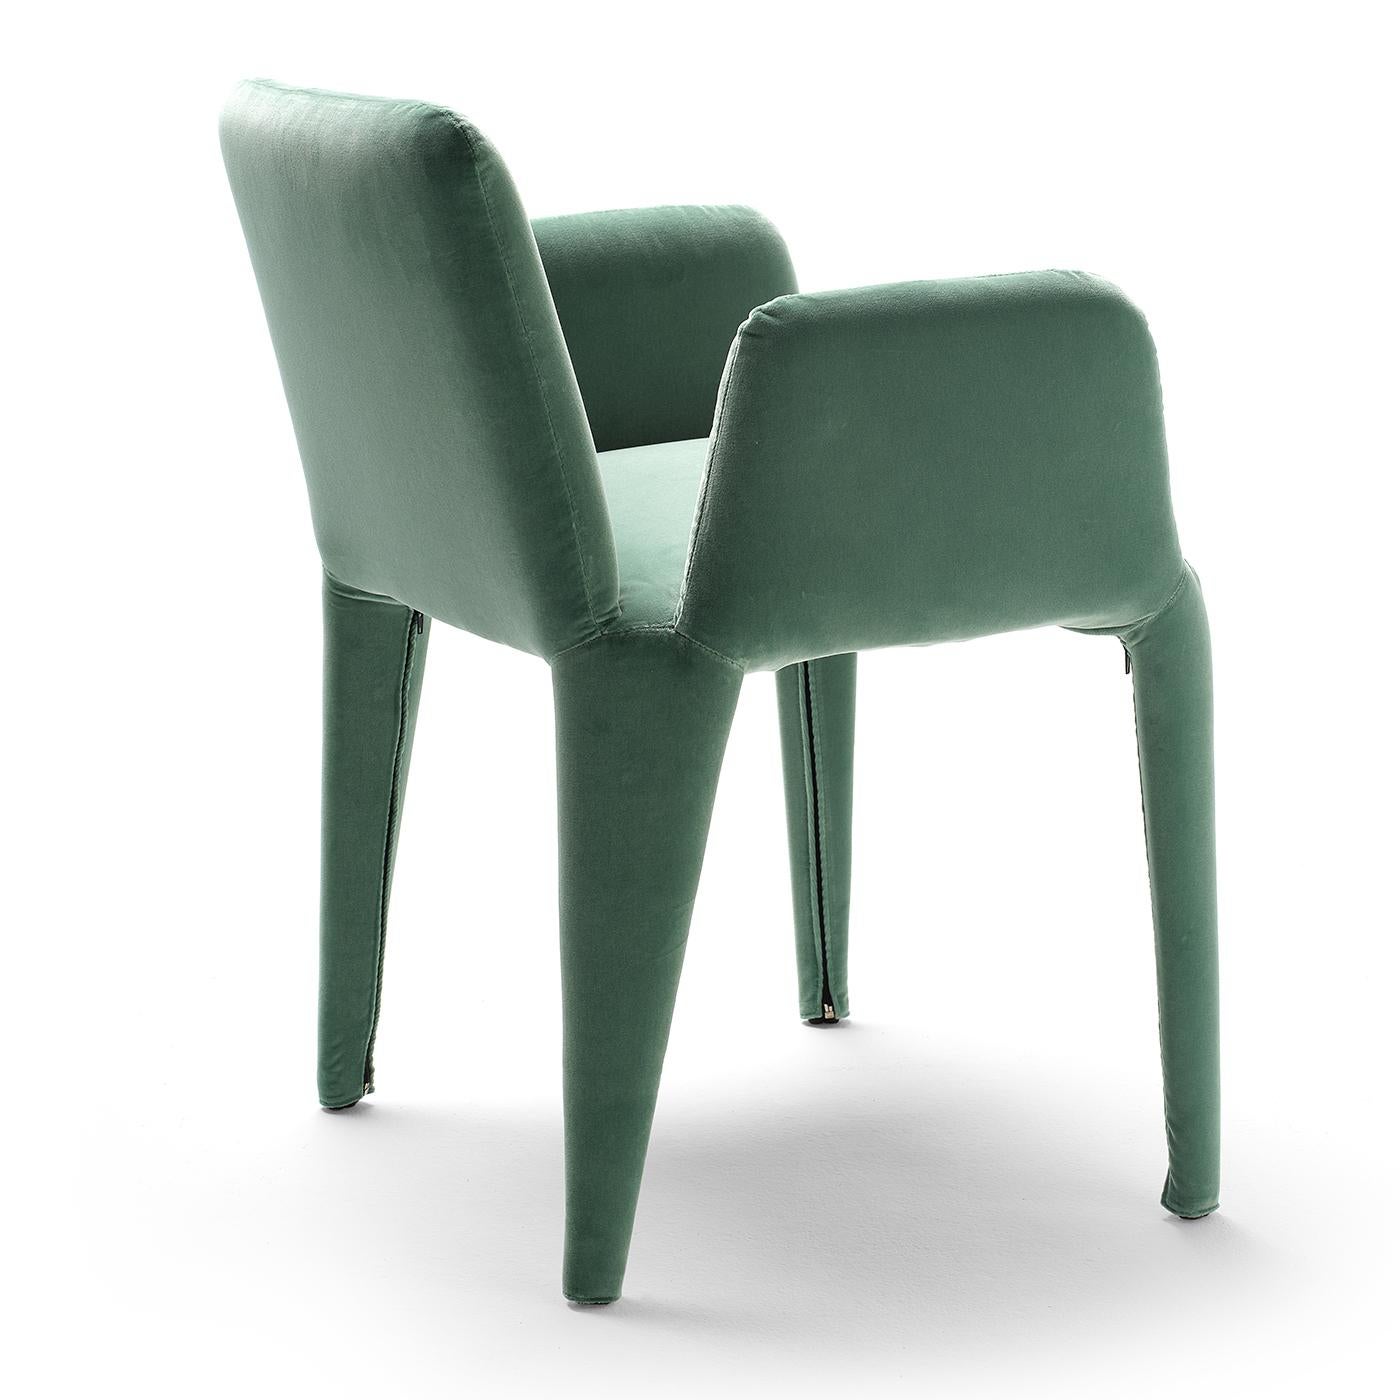 Fresh and stylish, this refined armchair boasts a dynamic silhouette entirely lined in Dacron and wrapped in a soft, green-hued fabric. Its outstanding lightness is the result of the superb pairing of the lightweight metal rod frame that sustains